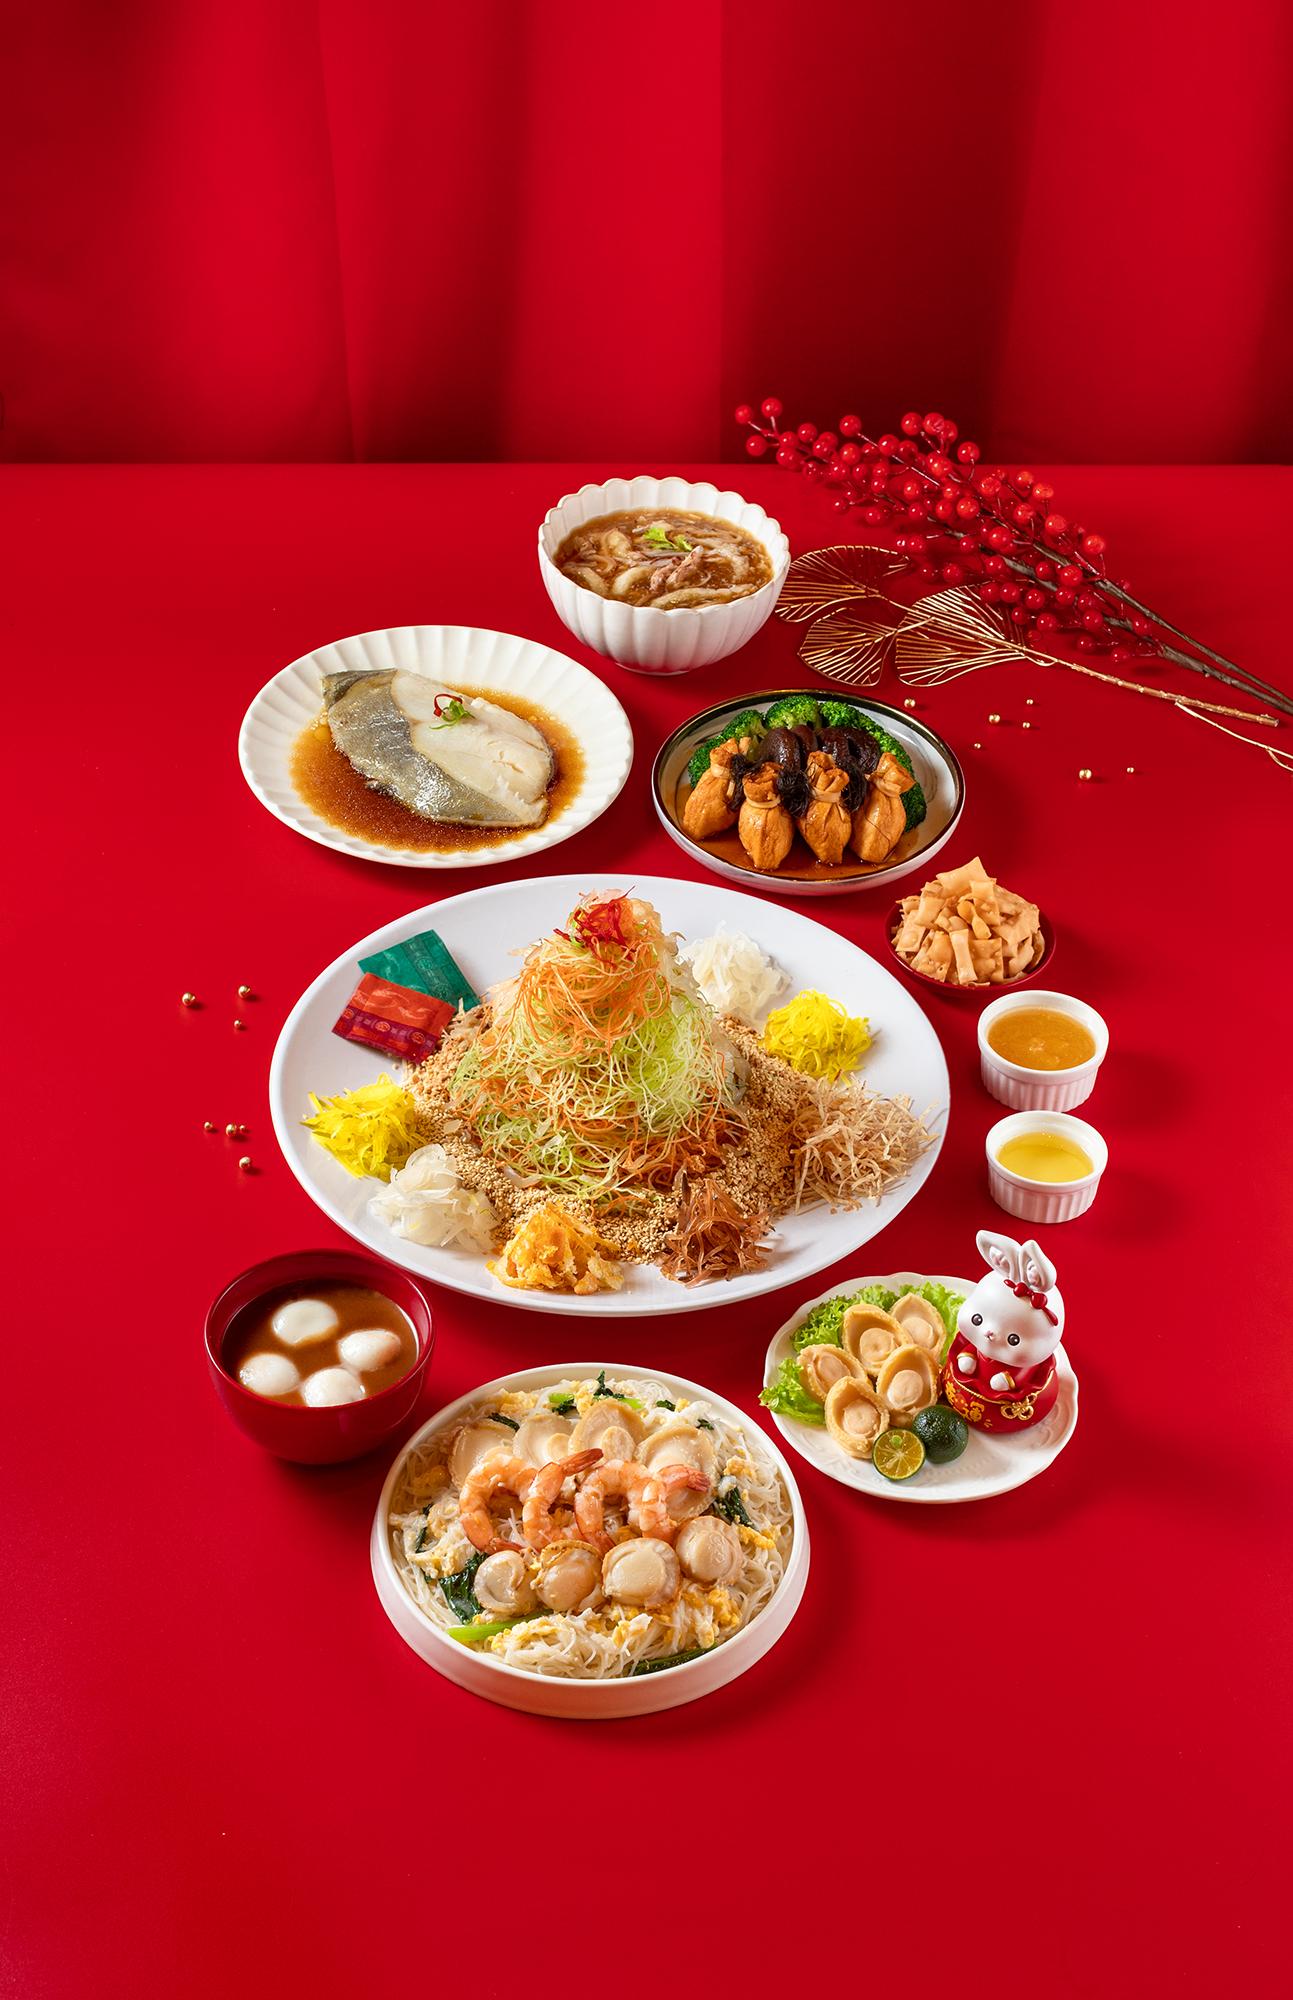 Lobang: MORE THAN 50 CNY 2023 F&B Deals - Your one stop guide to Yusheng, Pen Cai, Set Menus and more this Lunar New Year! - 63